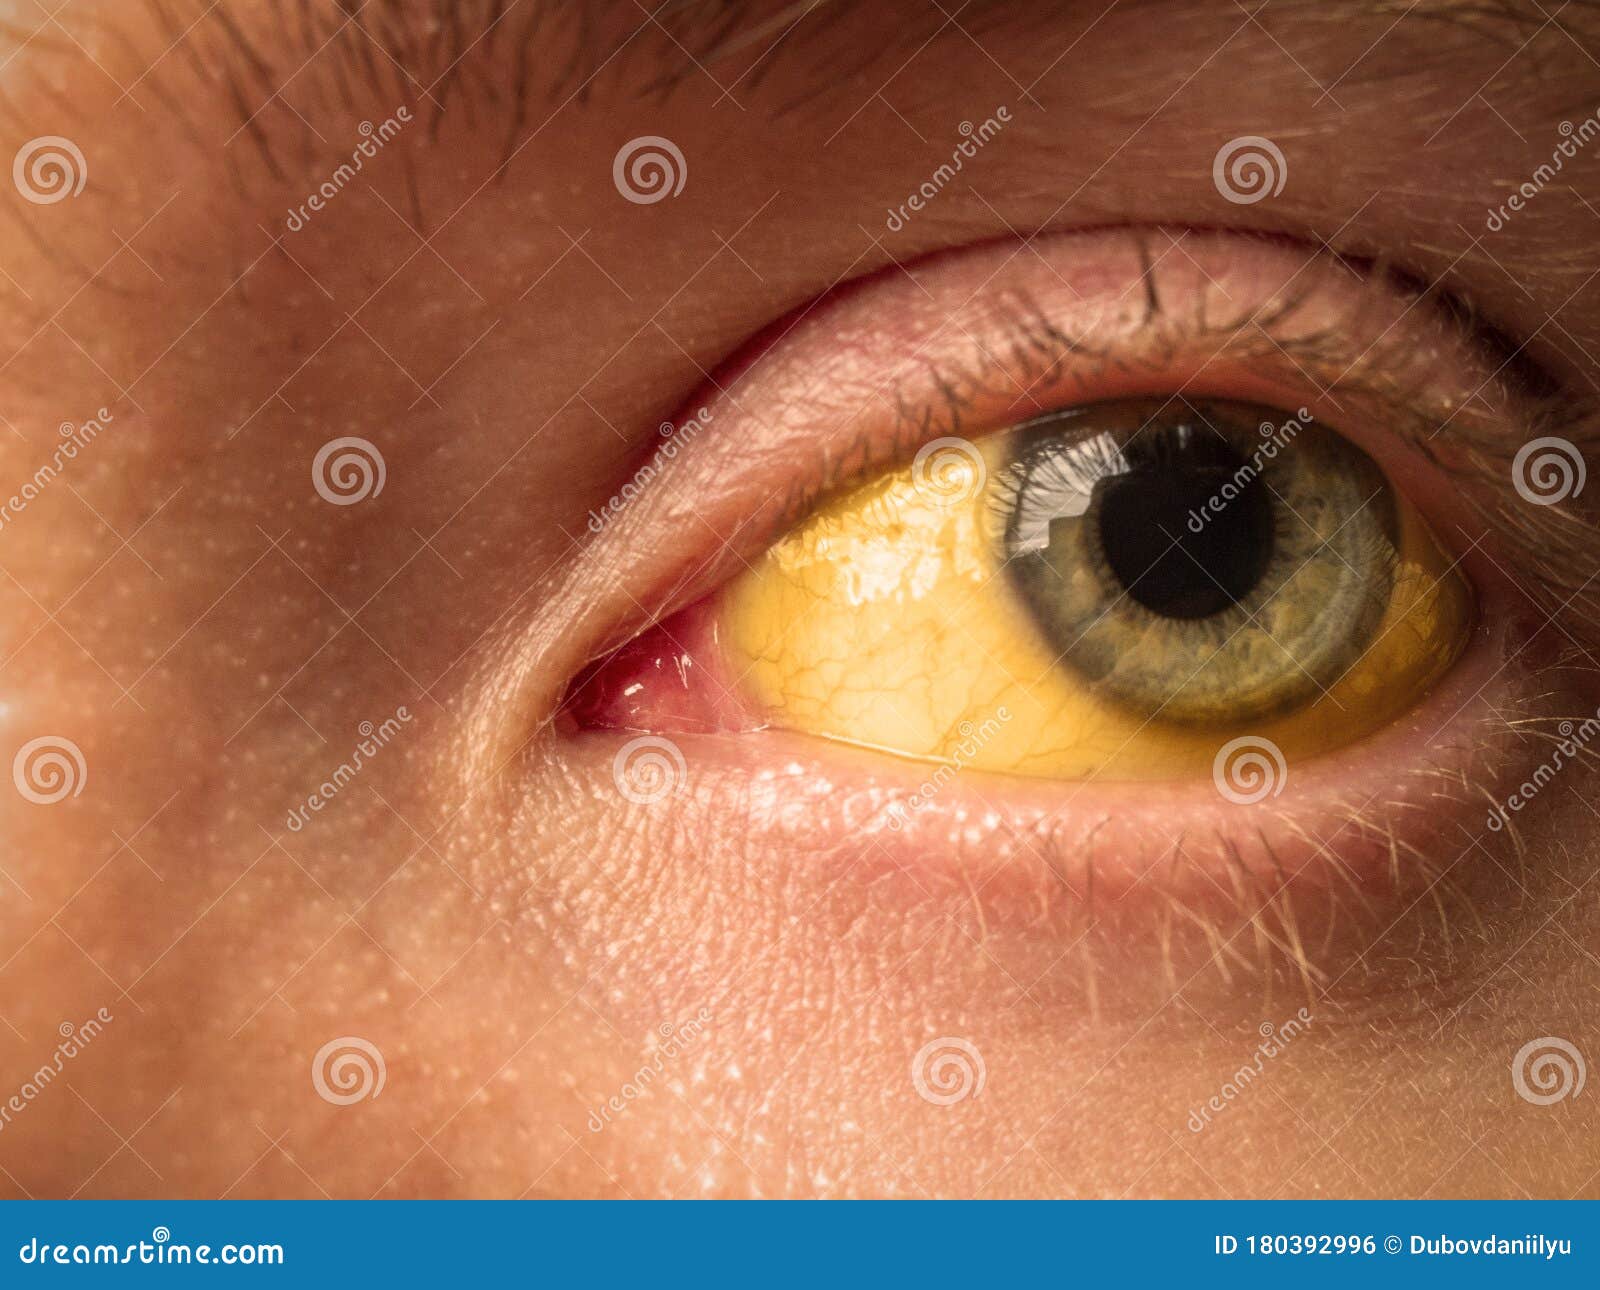 yellow staining of the sclera of the eye in diseases of the liver, cirrhosis, hepatitis